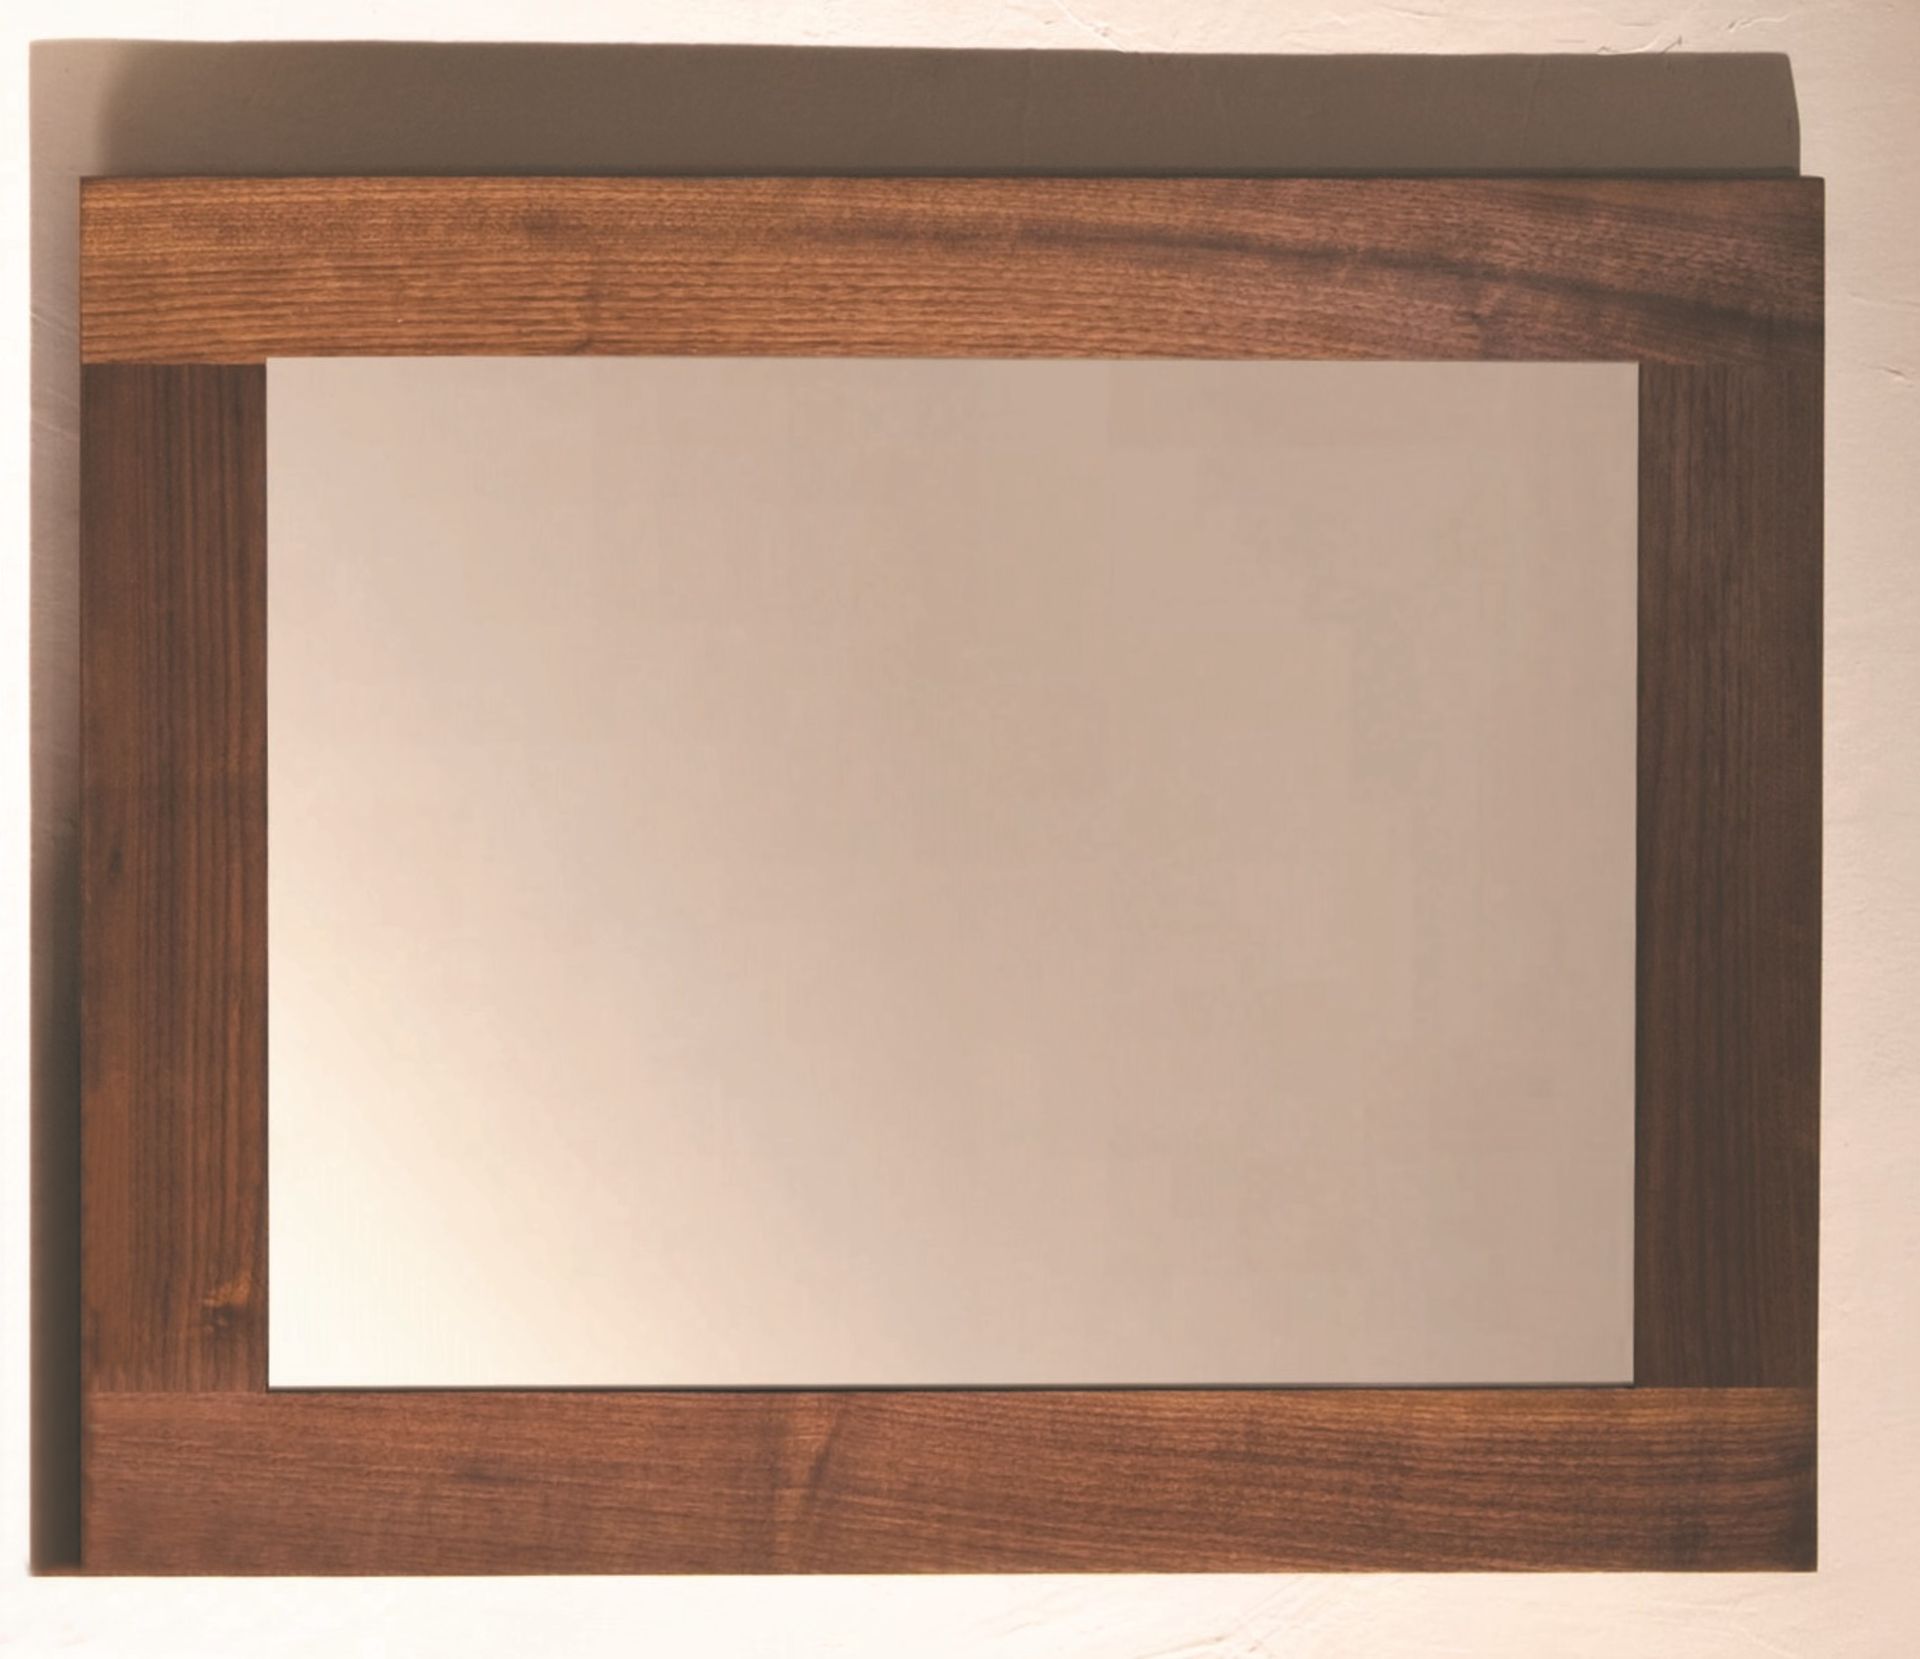 1 x Stonearth Medium Wall Mirror Frame - American Solid Walnut Frame For Mirrors or Pictures